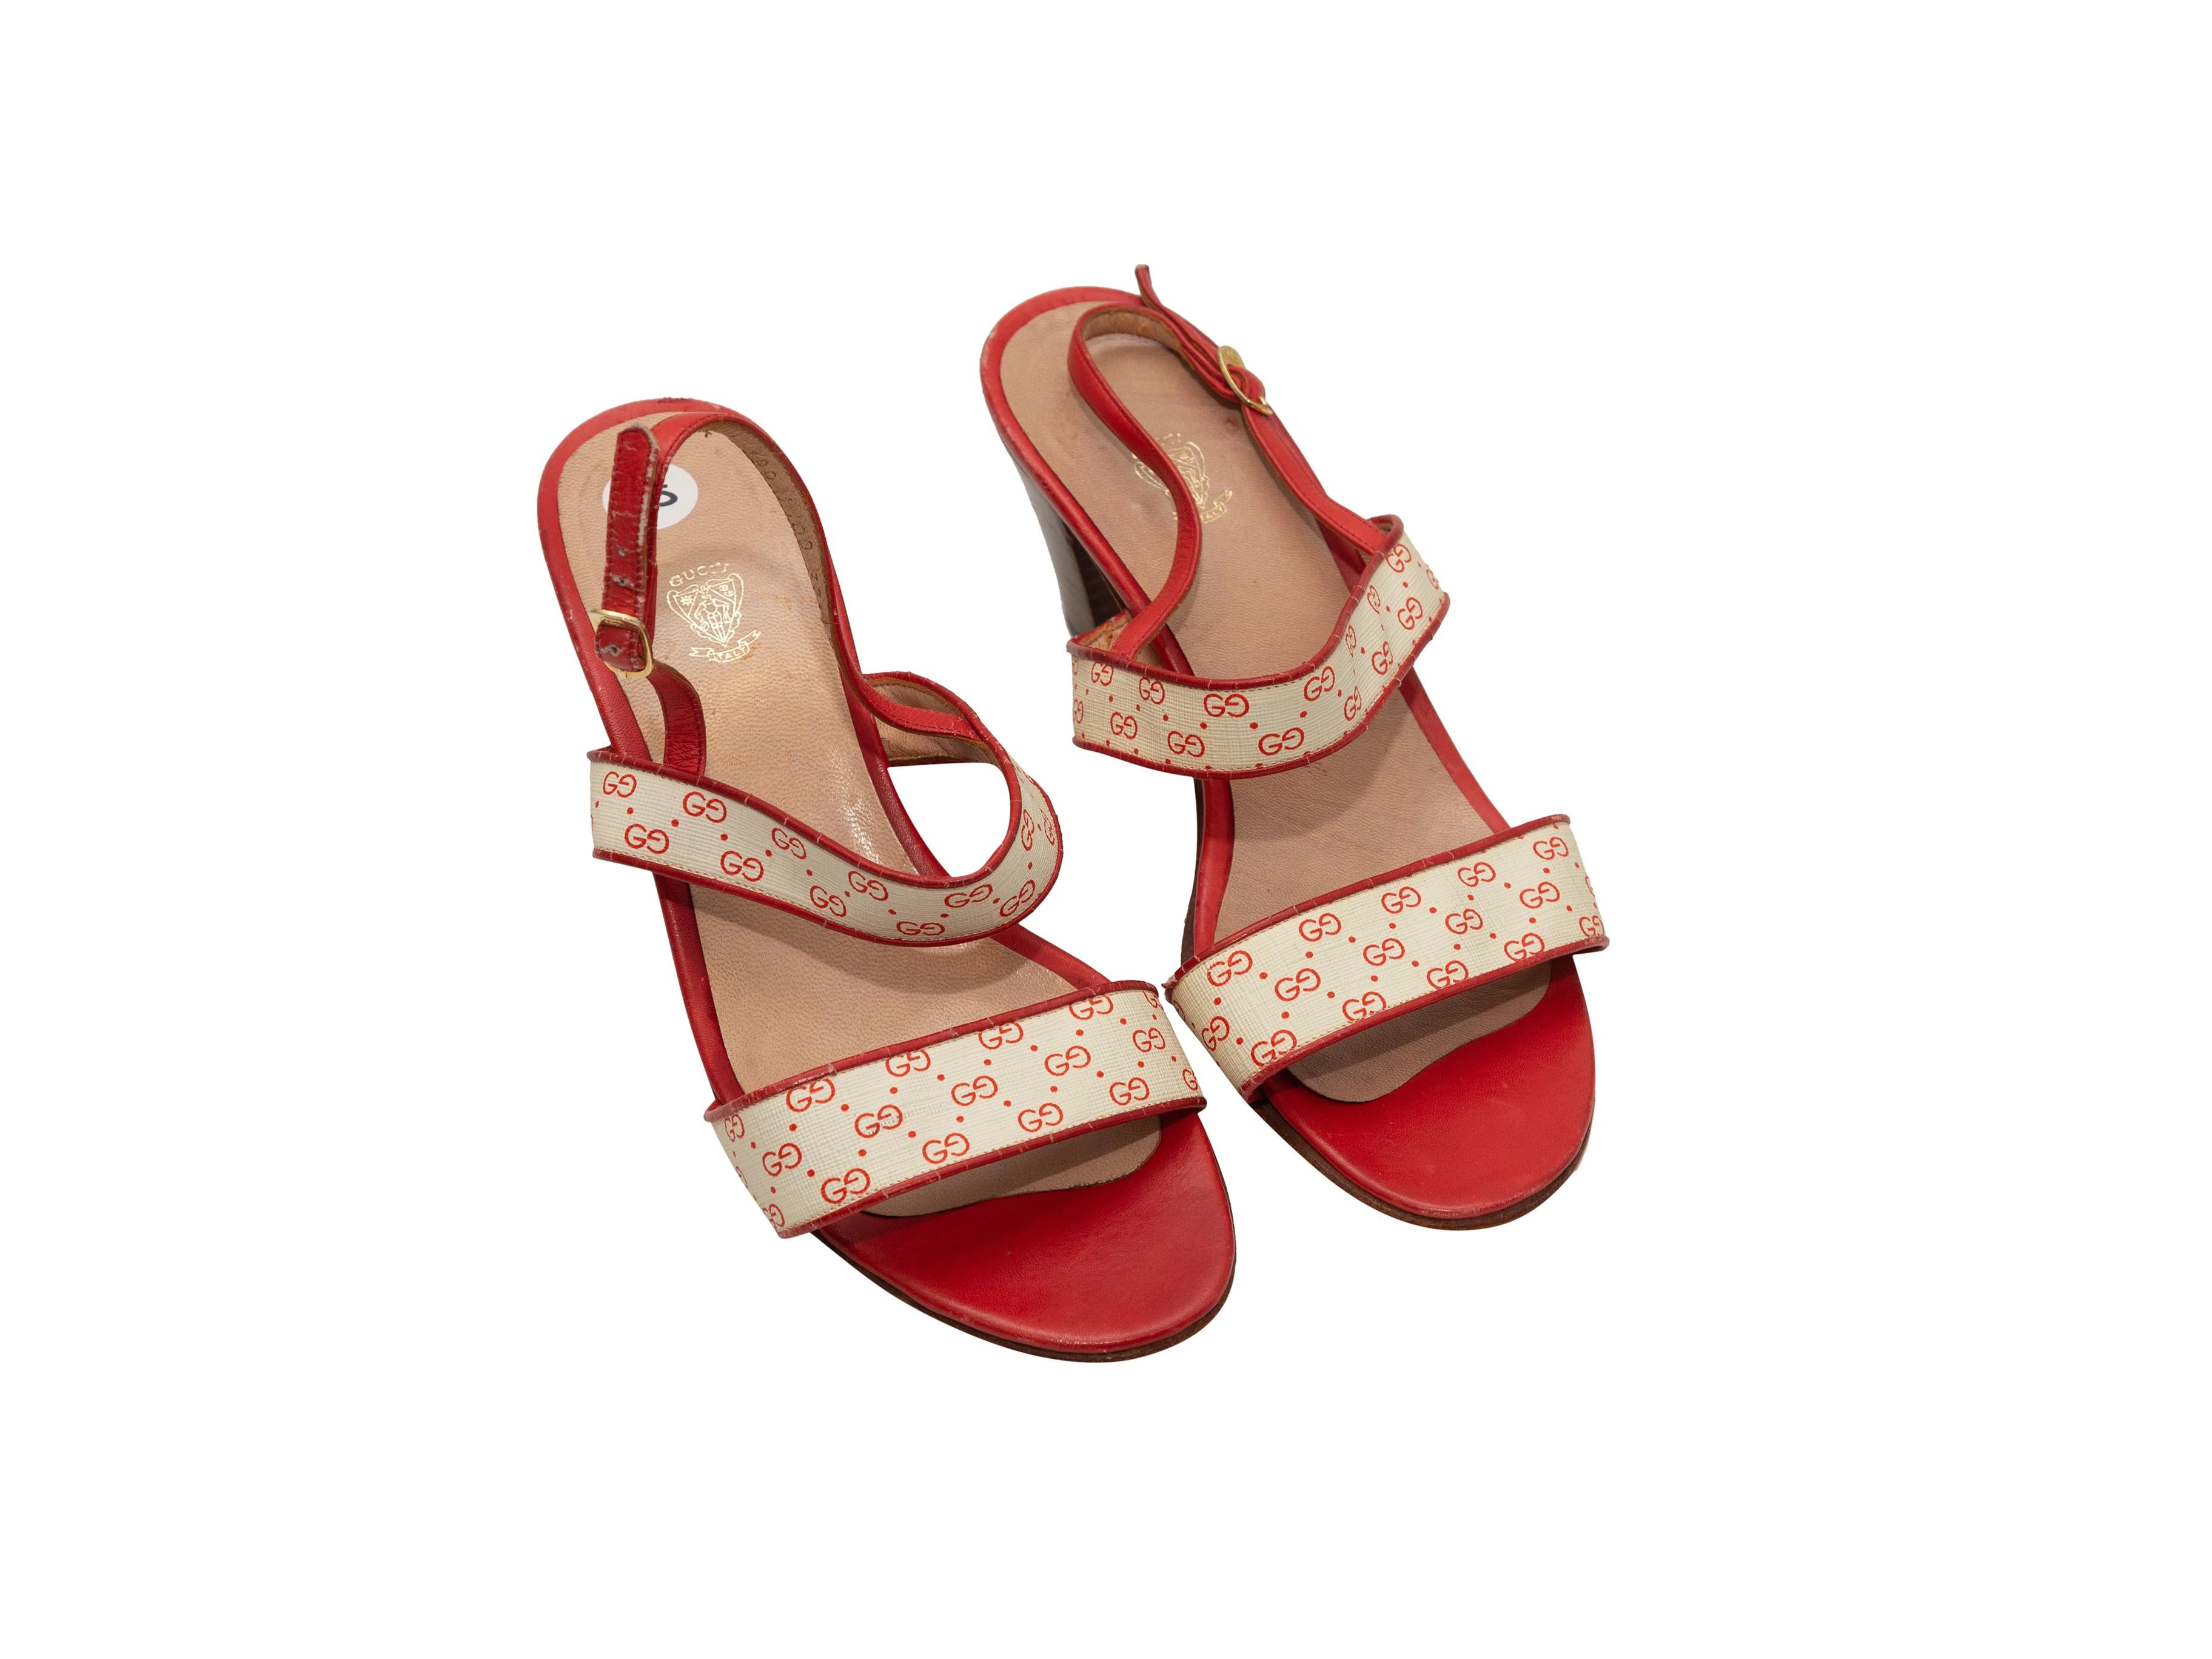 Product details: Vintage white and red GG print slingback sandals by Gucci. Stacked heels. Gold-tone buckle closures at slingback straps. Designer size 37.5. 2.5